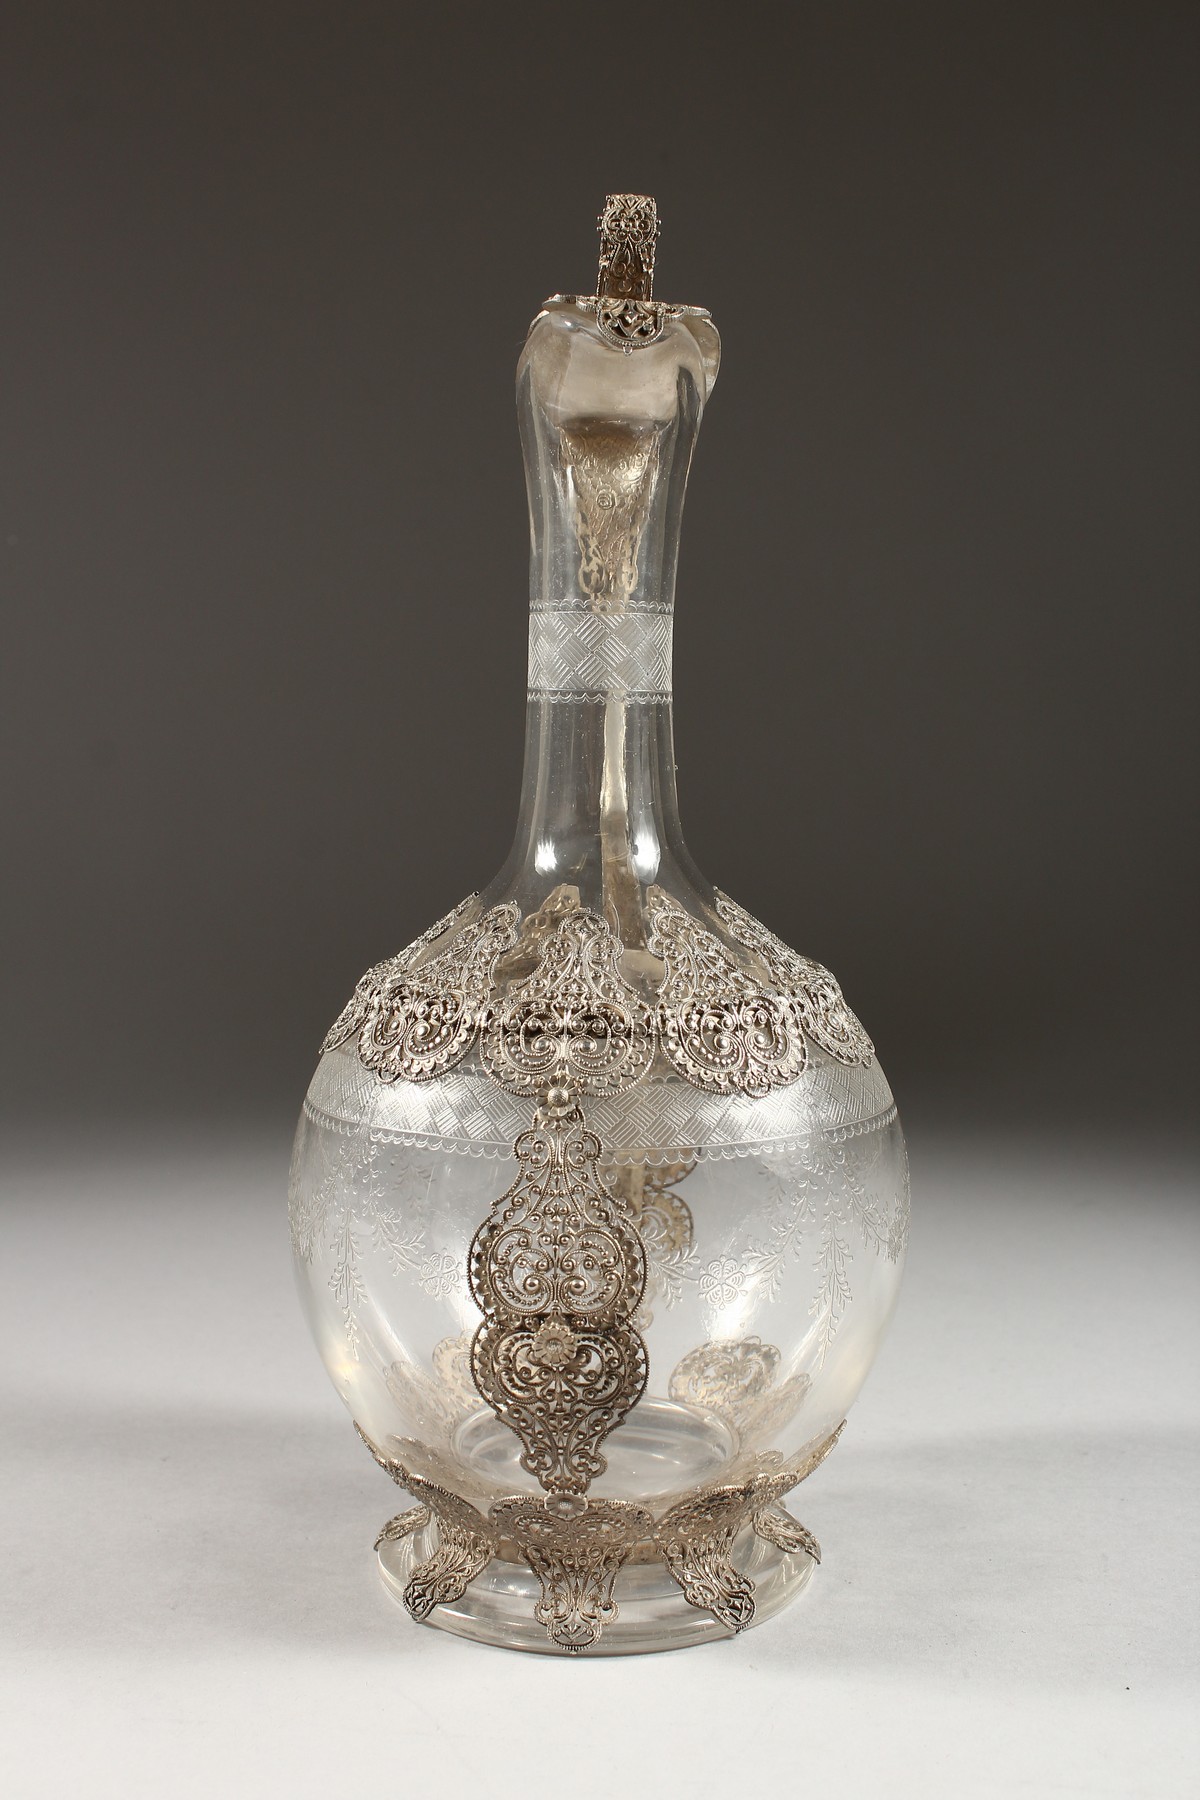 A SUPERB FILIGREE SILVER AND ETCHED GLASS CLARET JUG. 10.5ins high. - Image 4 of 5